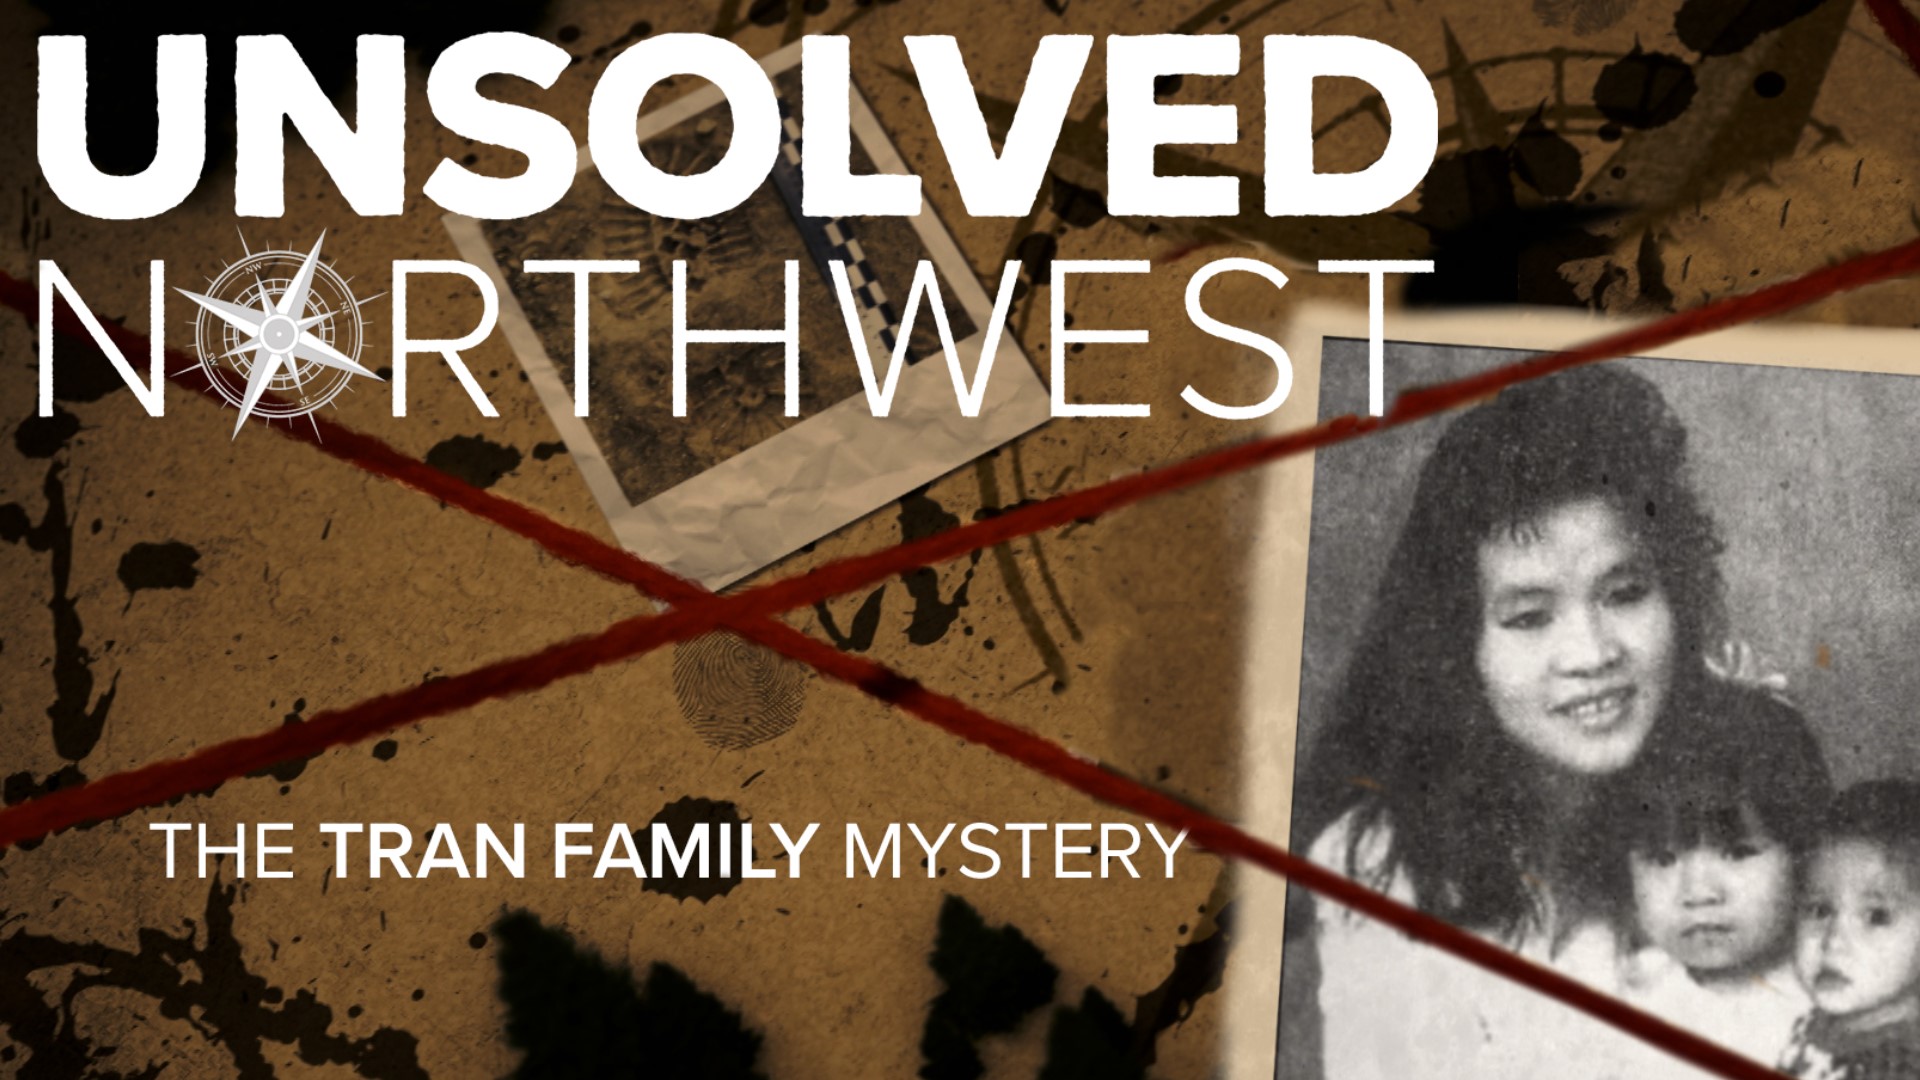 Linda Tran and her children were killed in their home, which was then set on fire. The Unsolved Northwest team talked to detectives and family in search for answers.